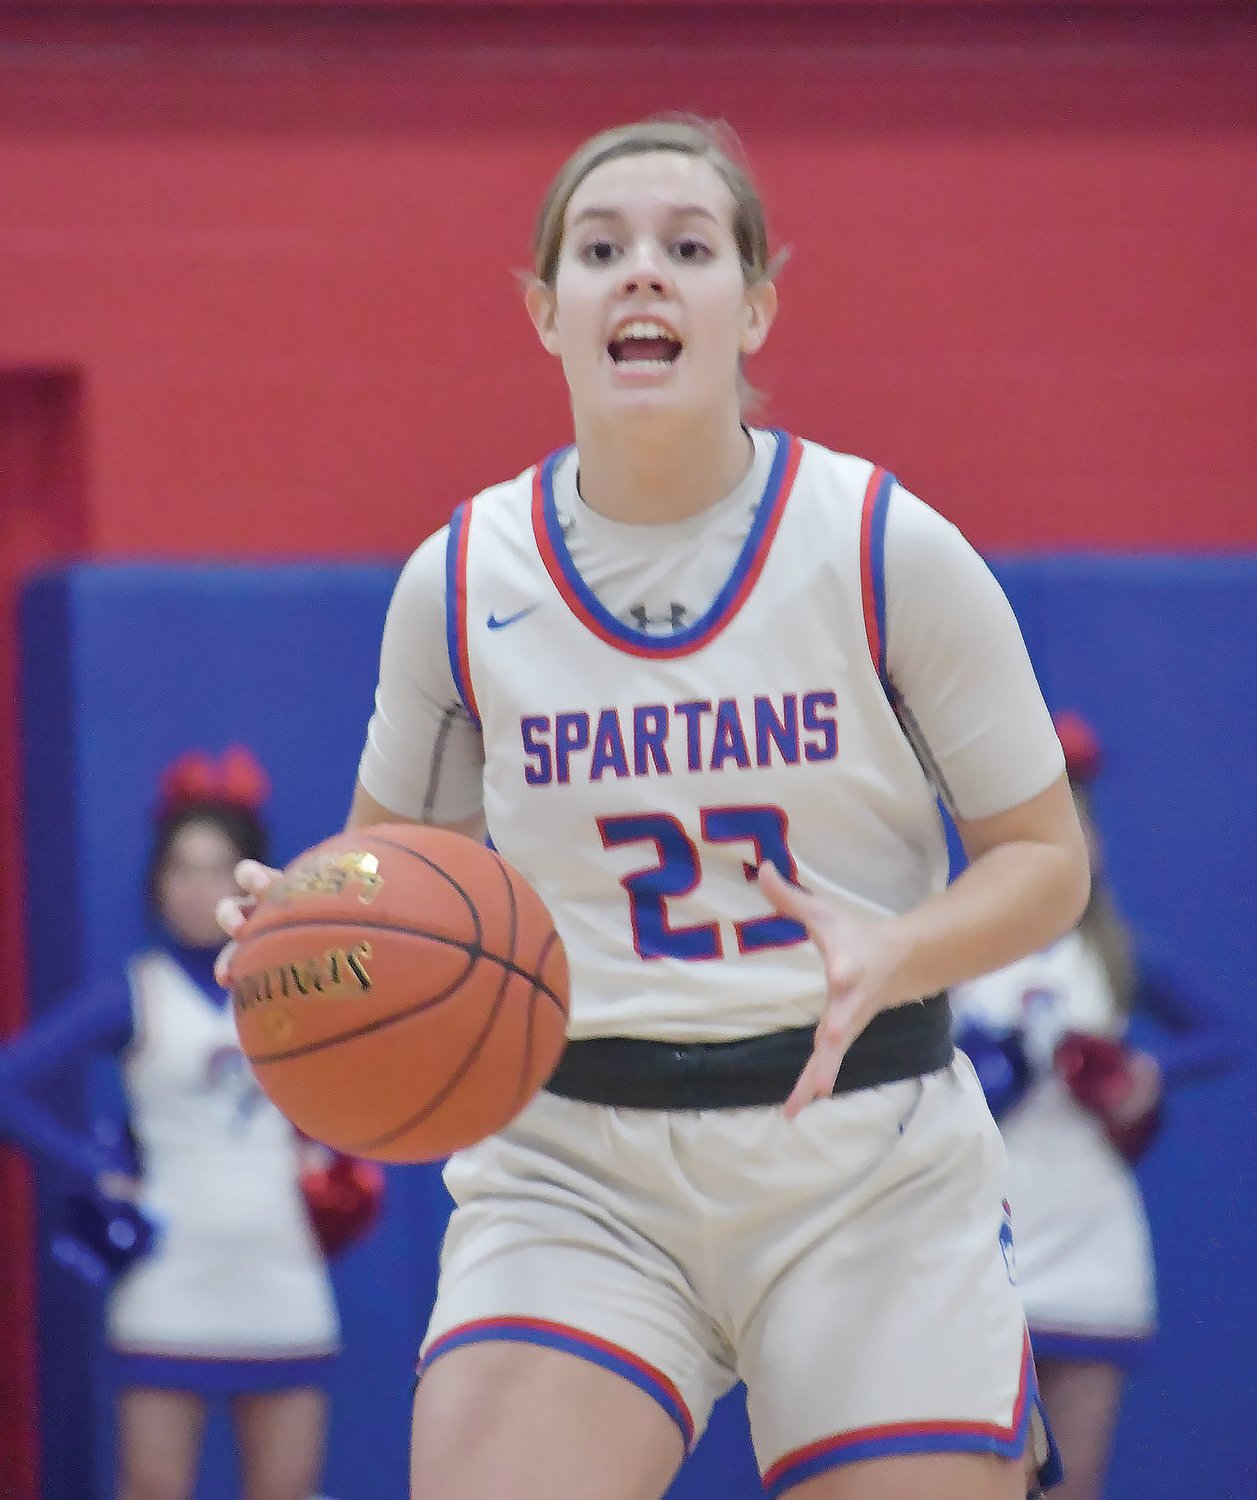 Moberly's Kennedy Messer calls out a play while the Spartans are on offense. Messer scored in double digits as Moberly thumped Fulton 66-29.